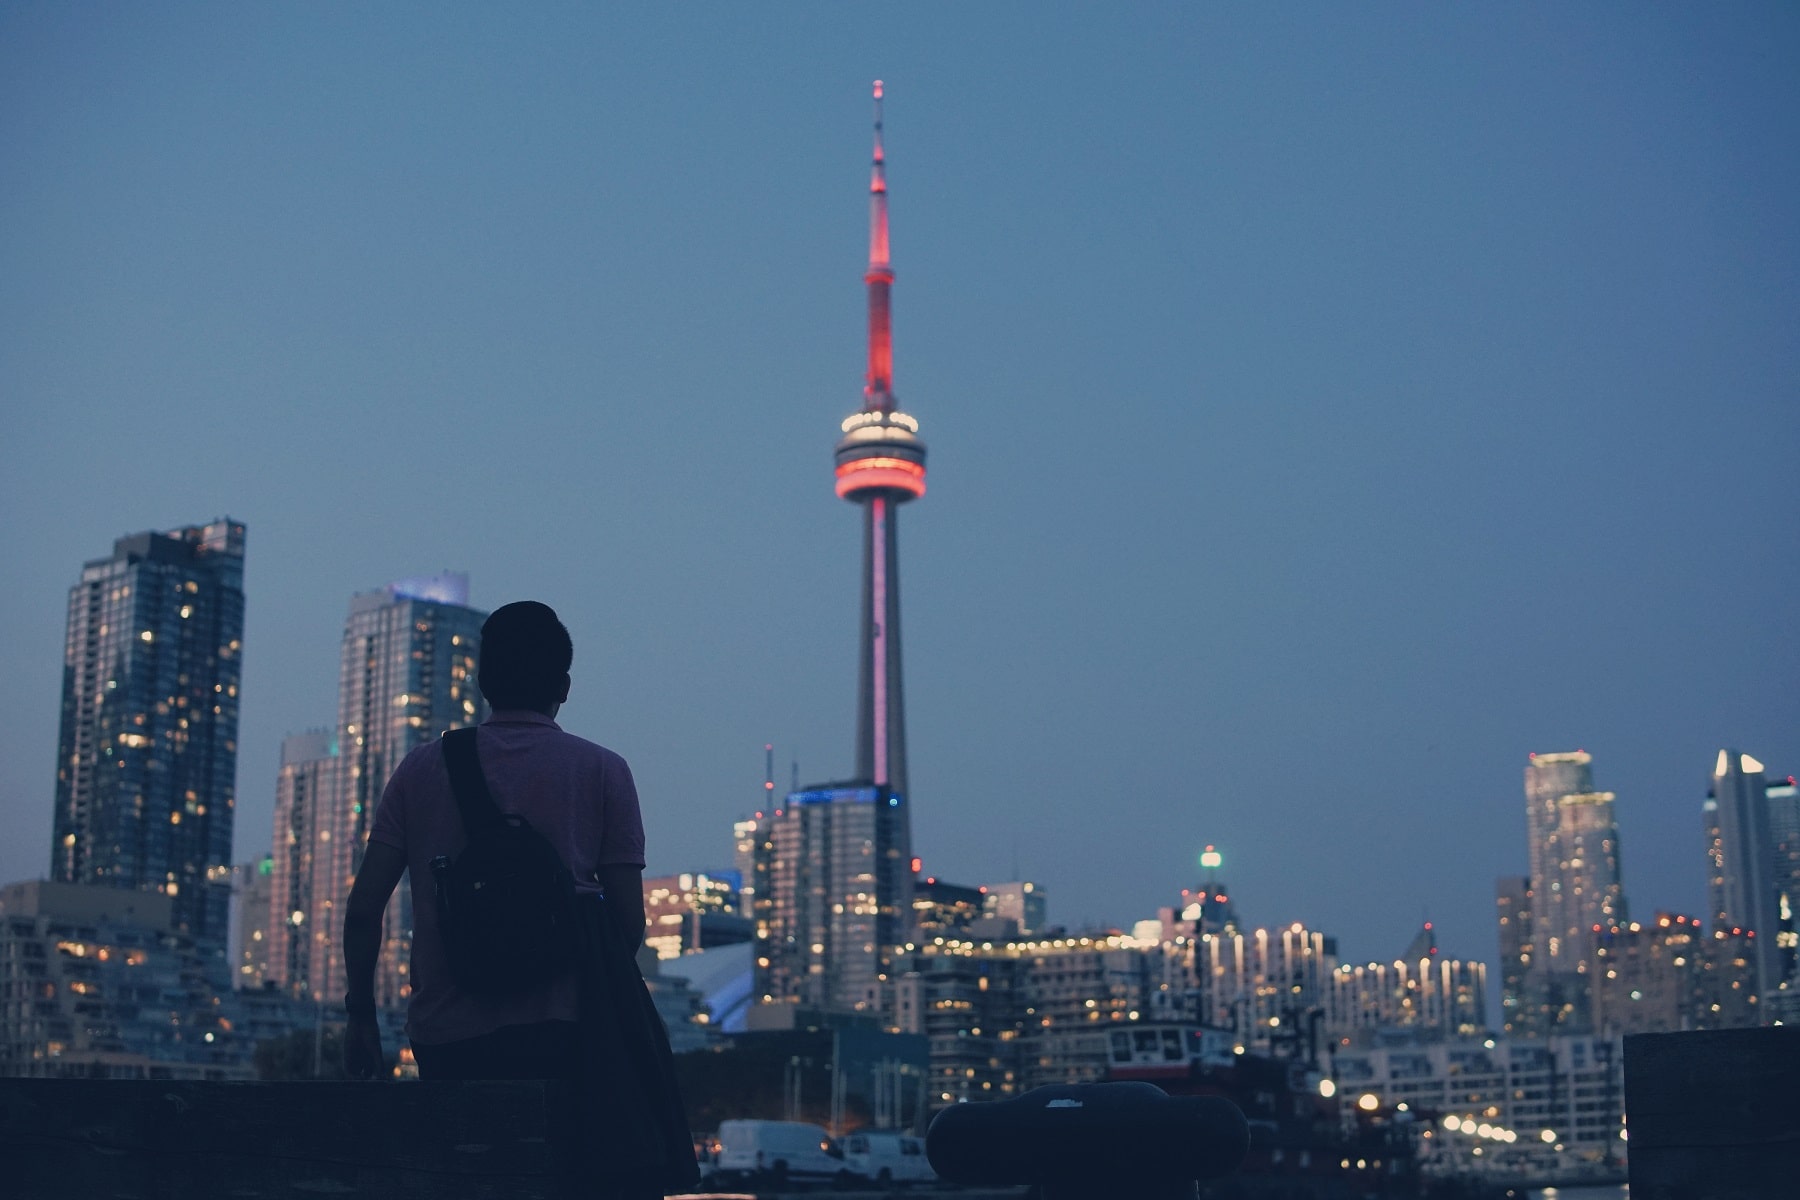 Step right into Toronto’s iconic skyline and beyond